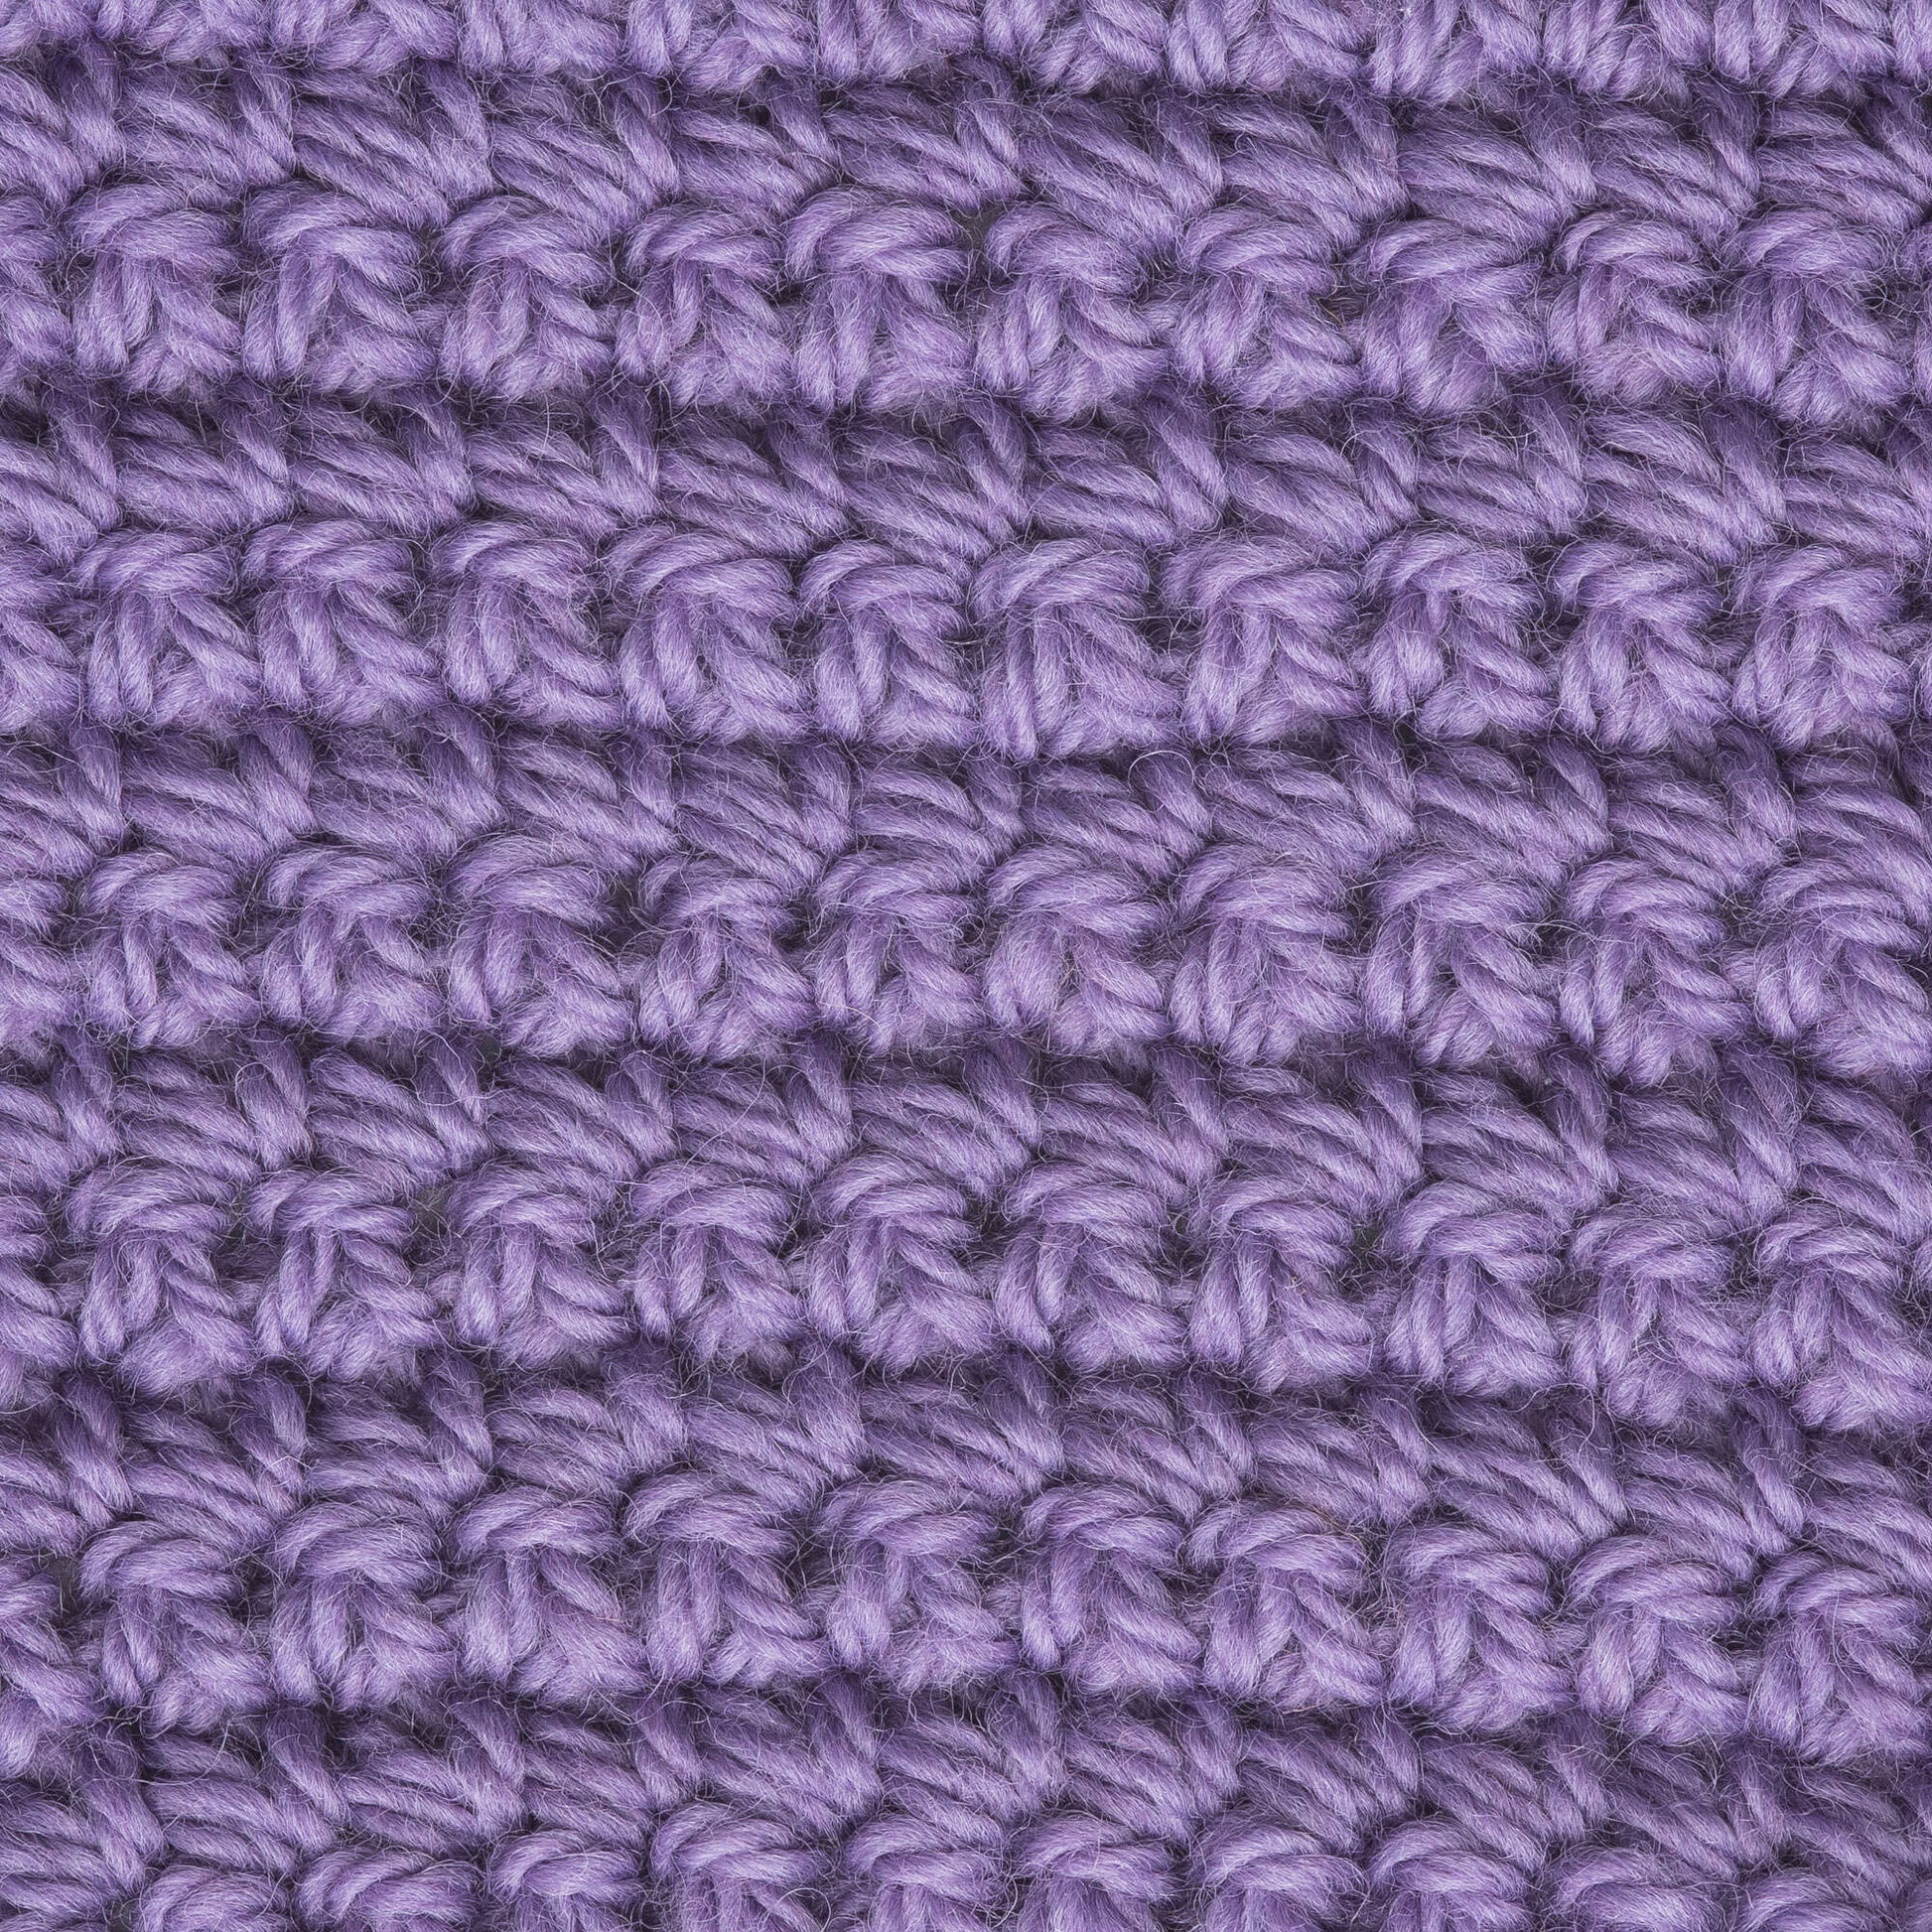 Patons Classic Wool Worsted Yarn - Discontinued Shades Wisteria